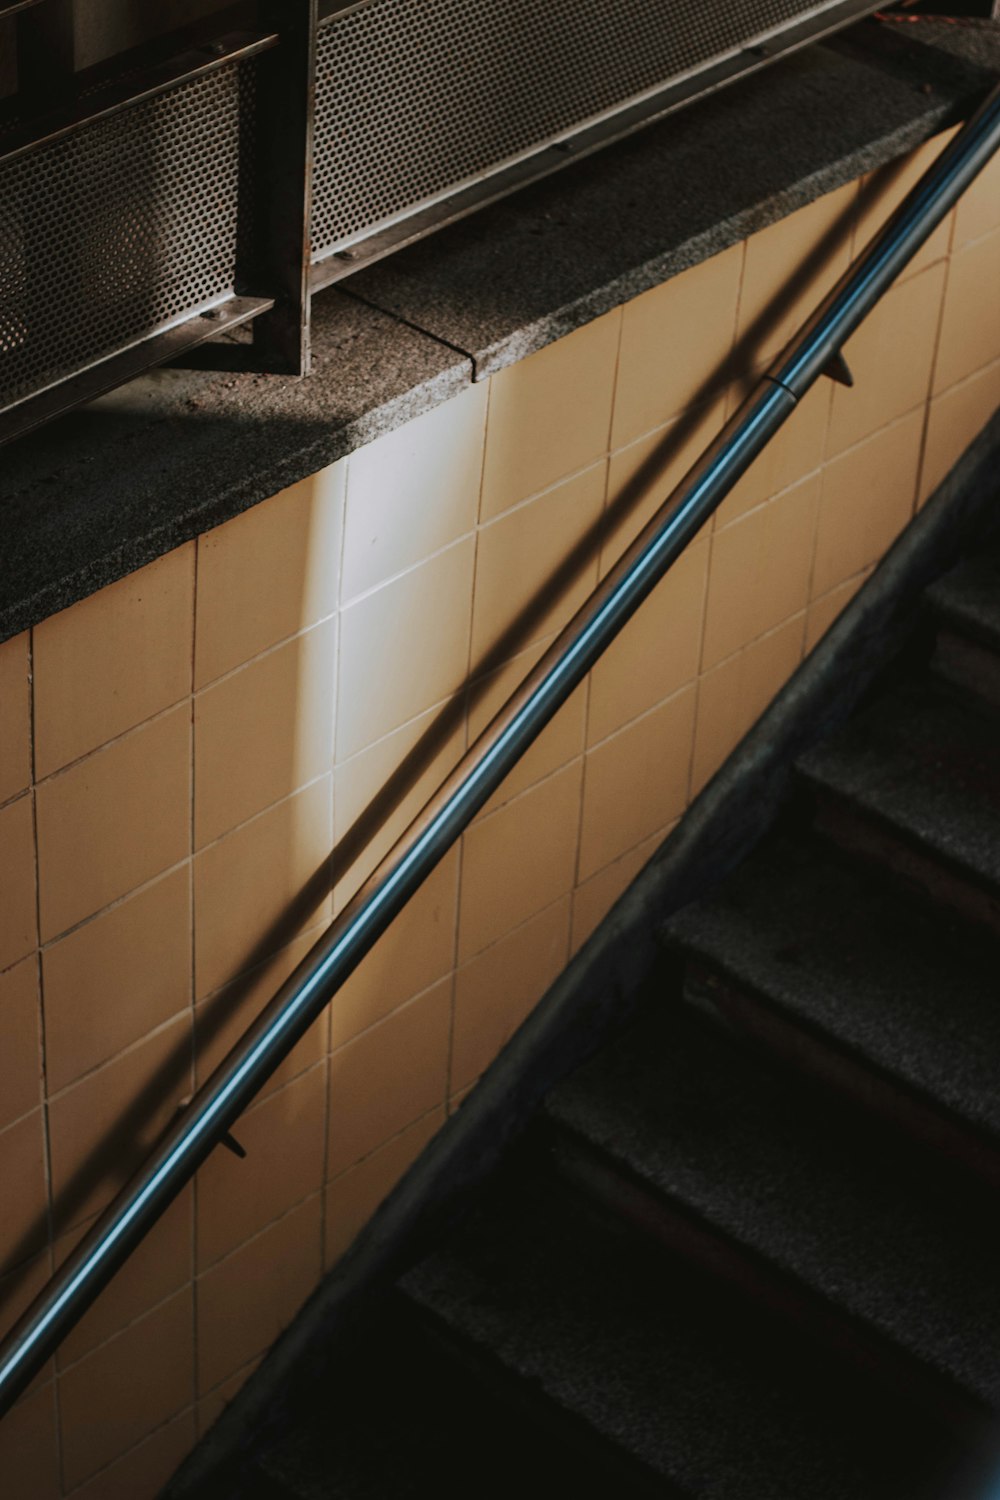 an escalator in a subway station with tiled walls